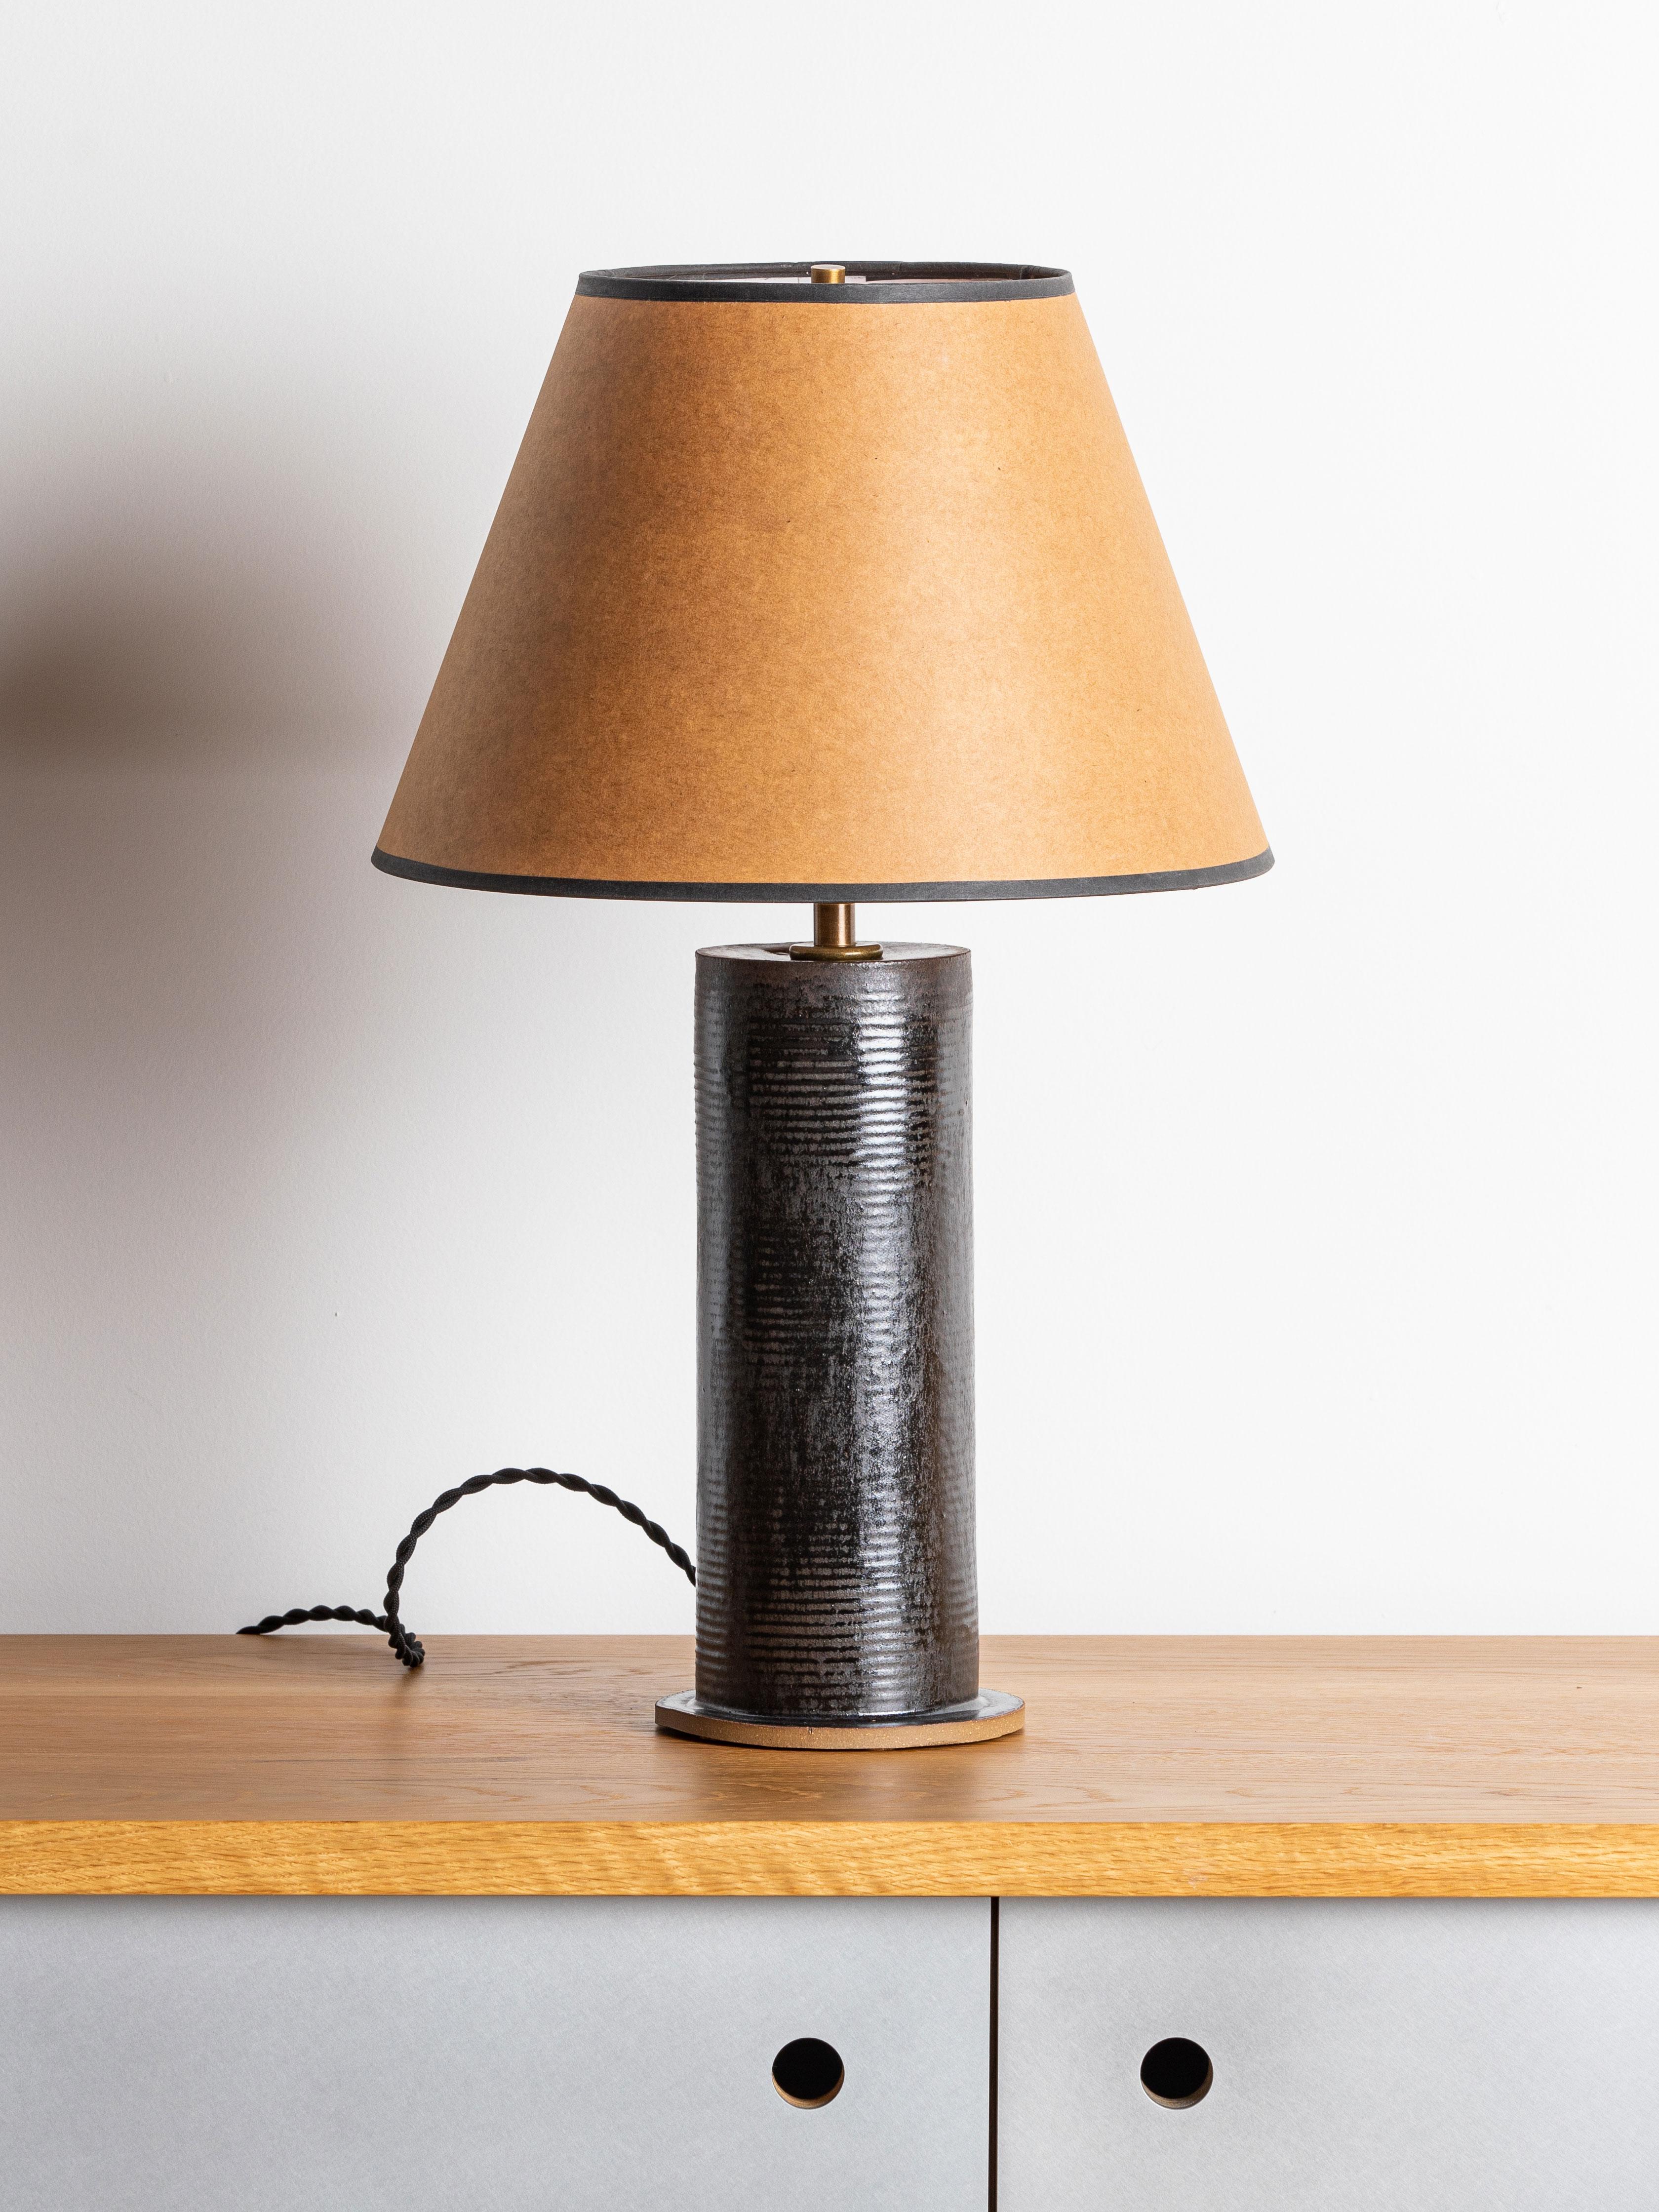 Our stoneware Houston Lamp is handcrafted using slab-construction techniques. The lamp’s pattern is created by rolling the surface with textured rolling pins and rods.

FINISH

- Poured glaze, pictured in Lead
- Antique brass fittings
-